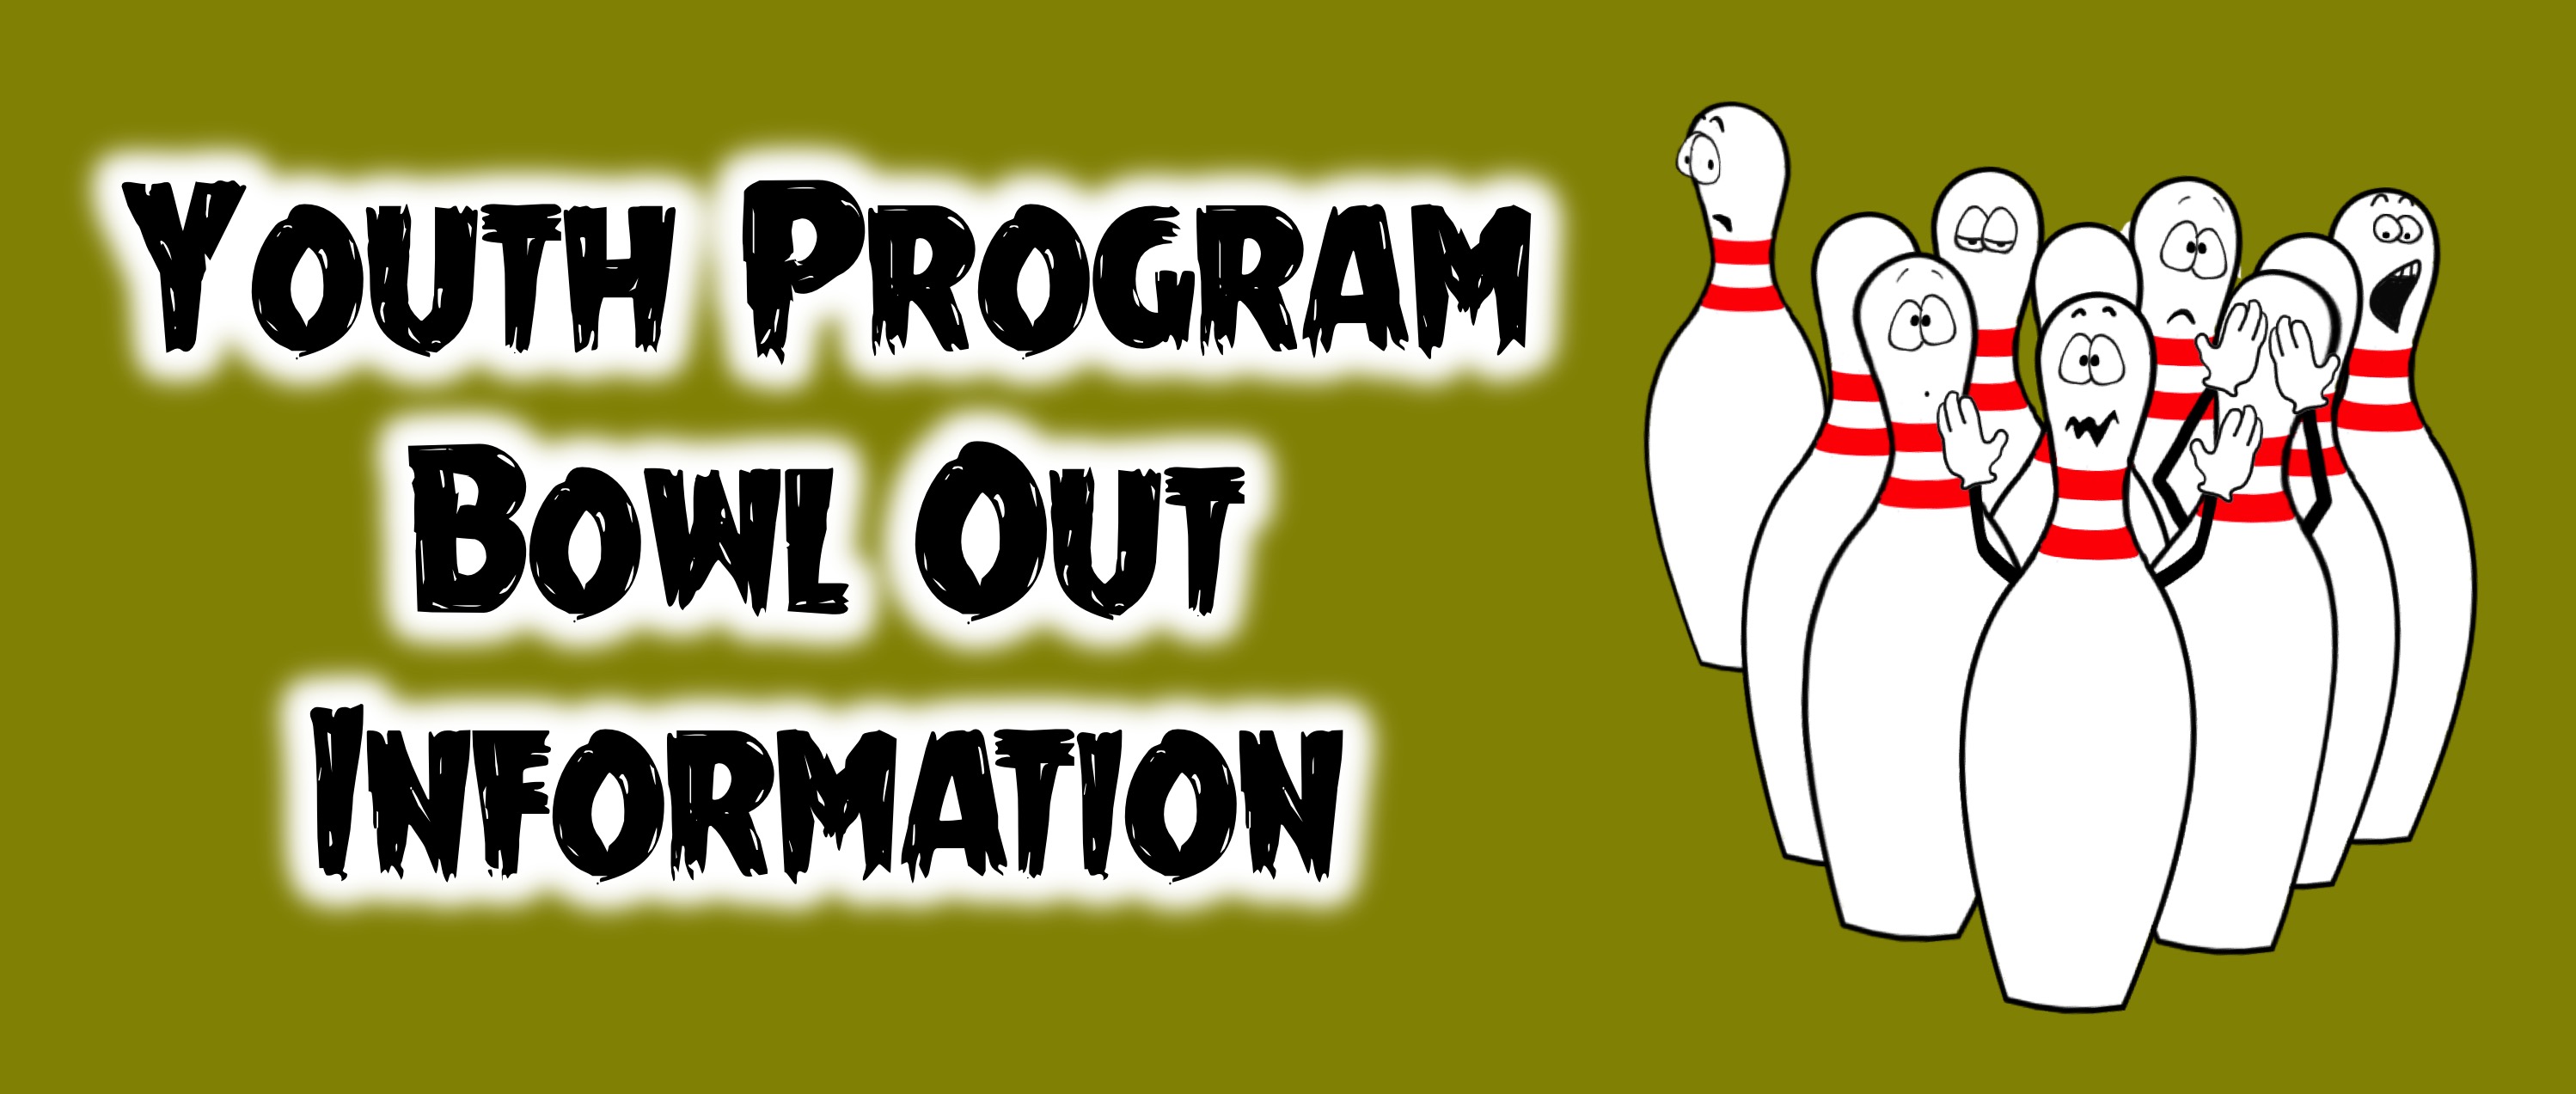 Youth Program Bowl Out Information